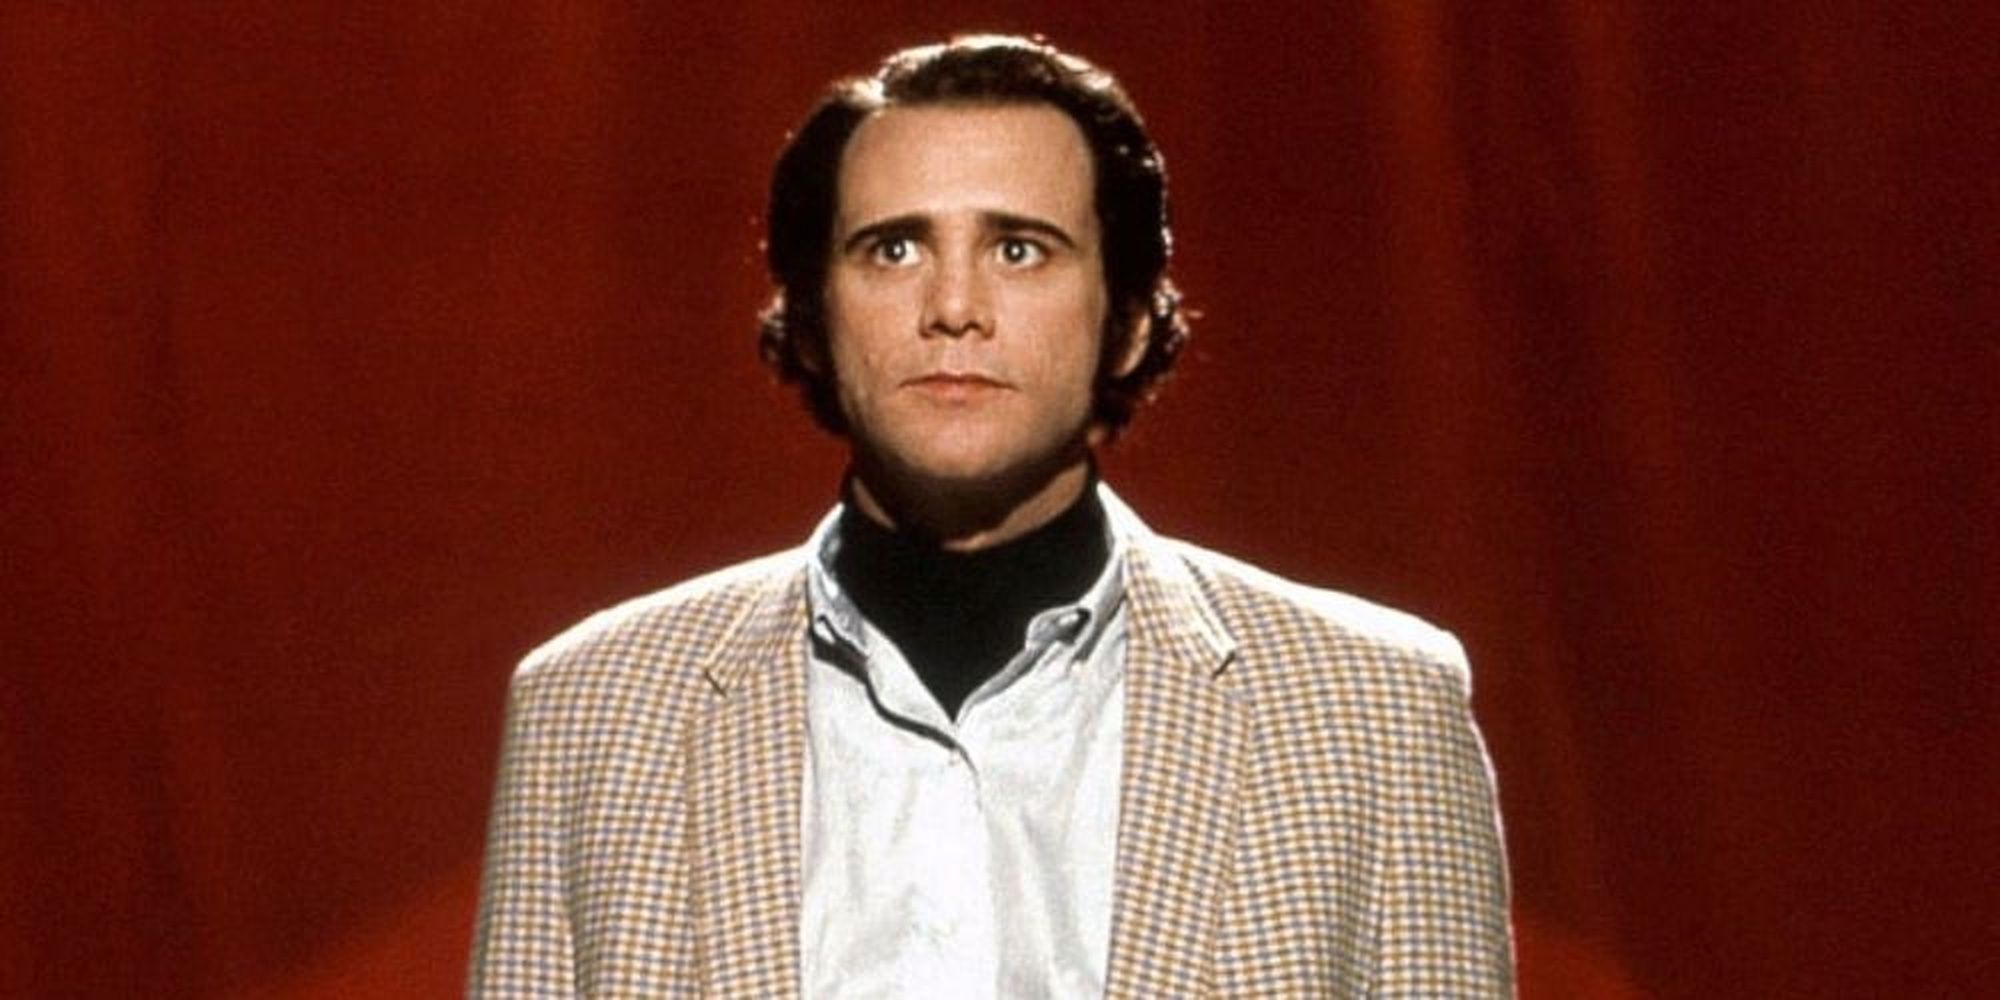 Jim Carrey As Andy Kaufman in Man on the Moon